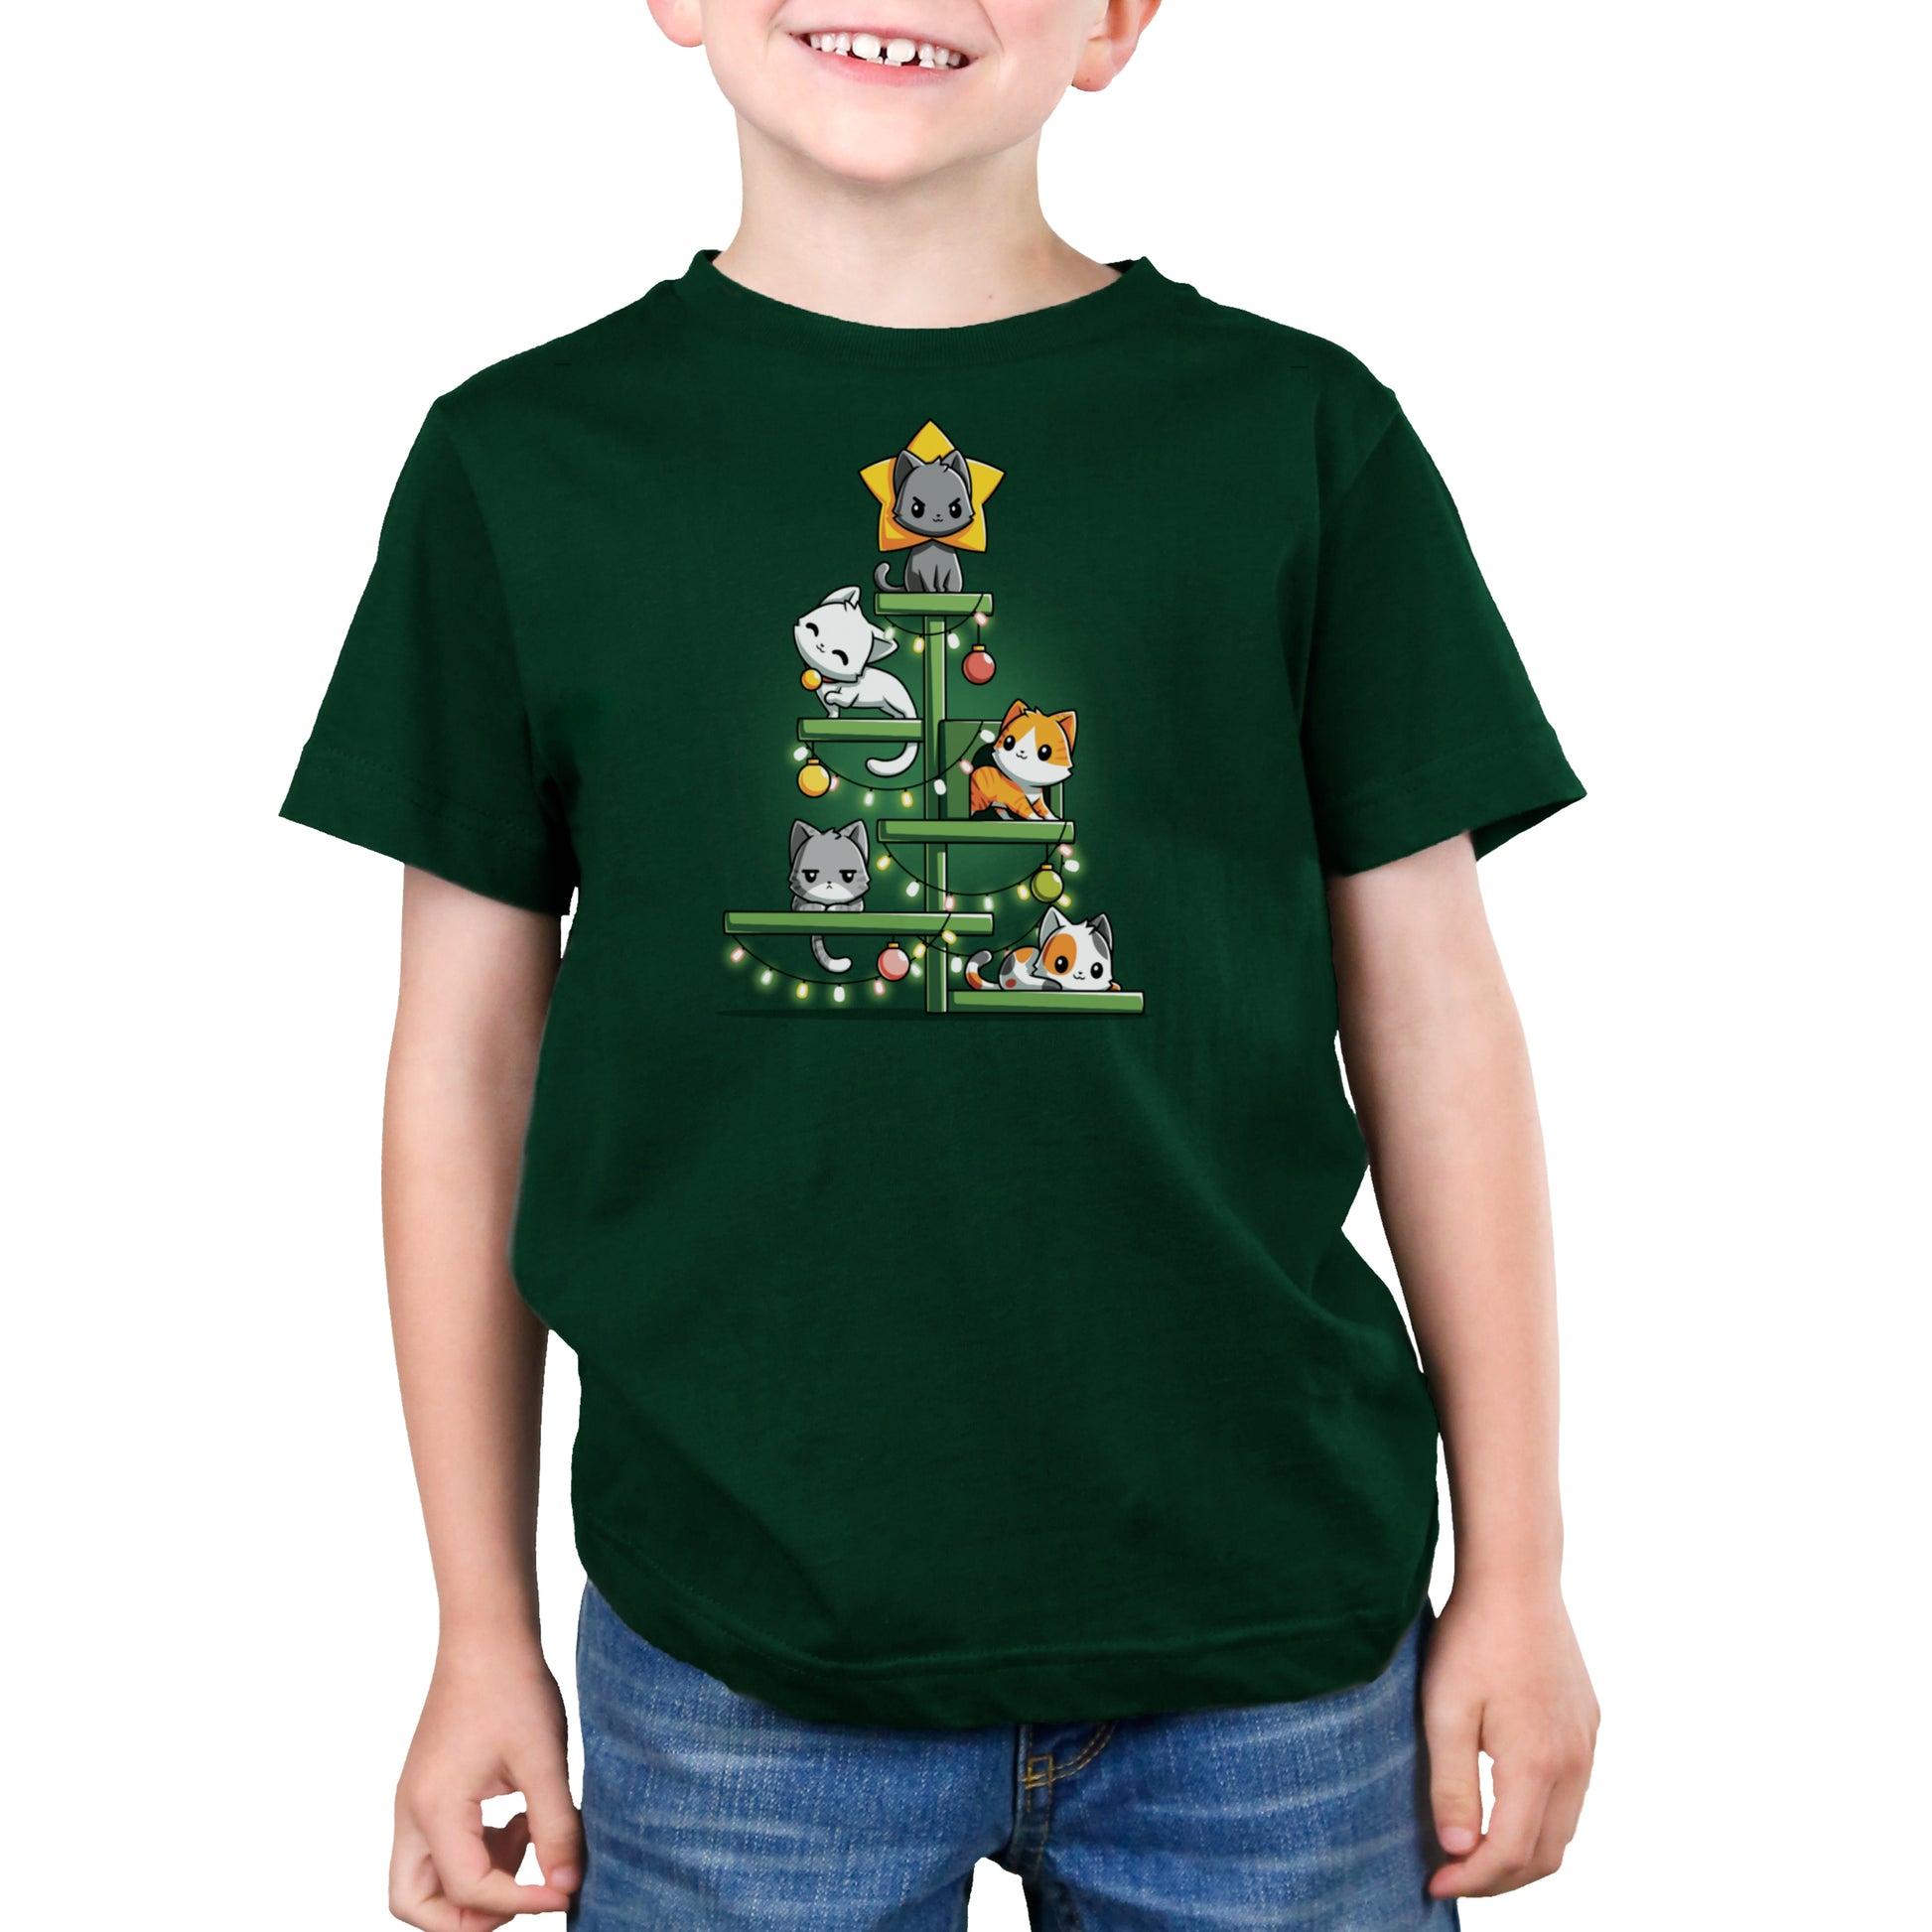 A child wearing a forest green Kitty Christmas Tree T-shirt by monsterdigital, with a Christmas tree made of cute cartoon cats, adorned with lights and ornaments. The shirt's super soft ringspun cotton looks cozy as the smiling child keeps their hands hidden.